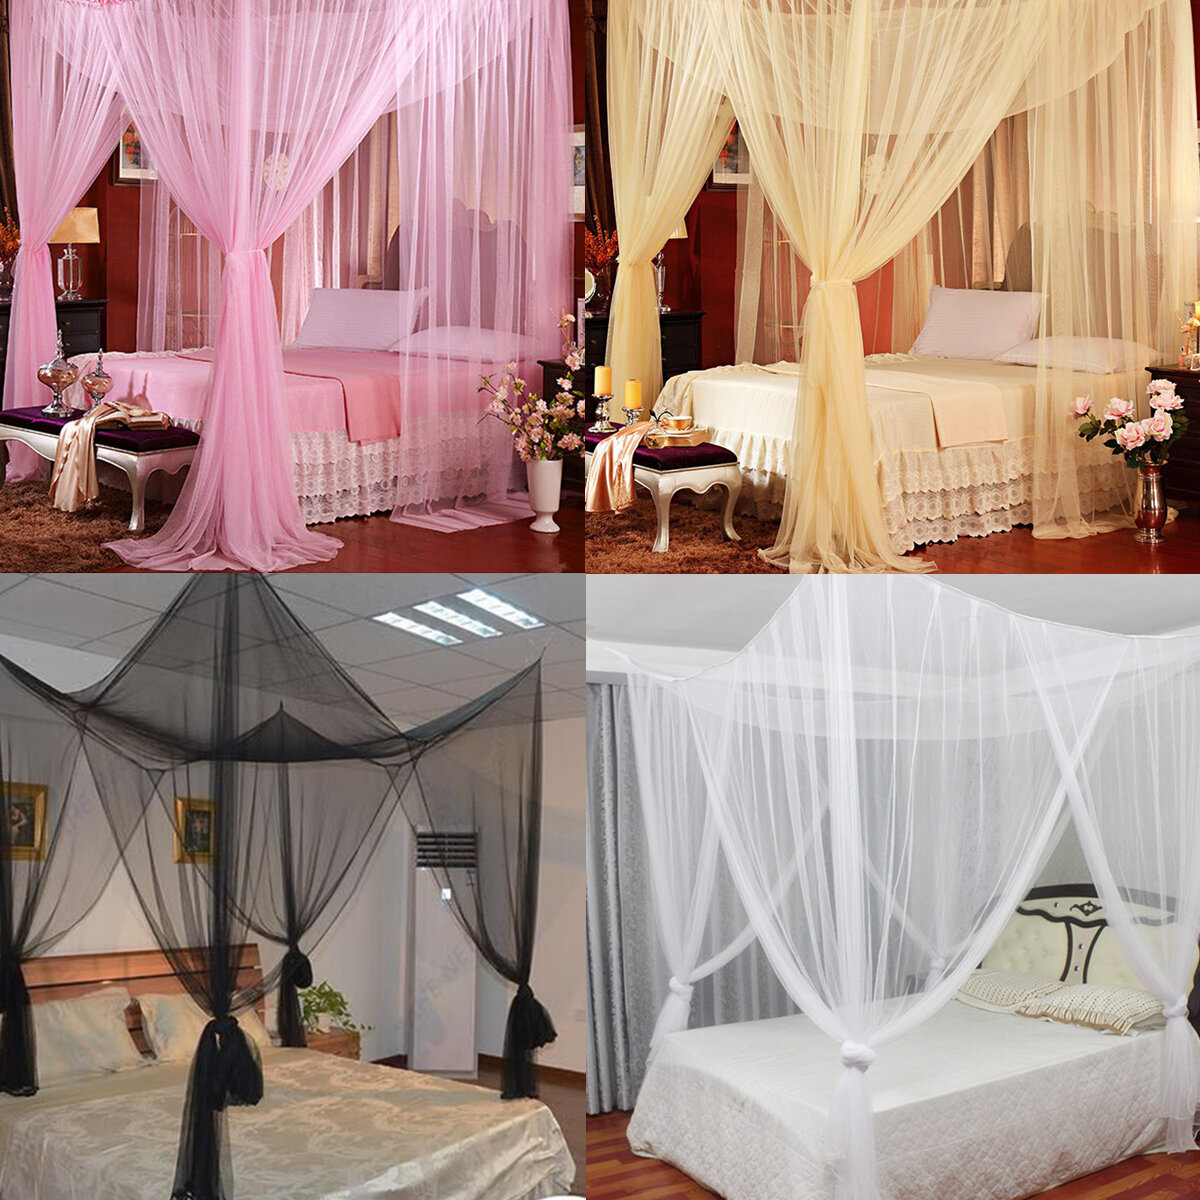 190x210x240cm Four-door Bedding Mosquito Net Queen Bed Anti-mosquito Summer Polyester Mesh Fabric